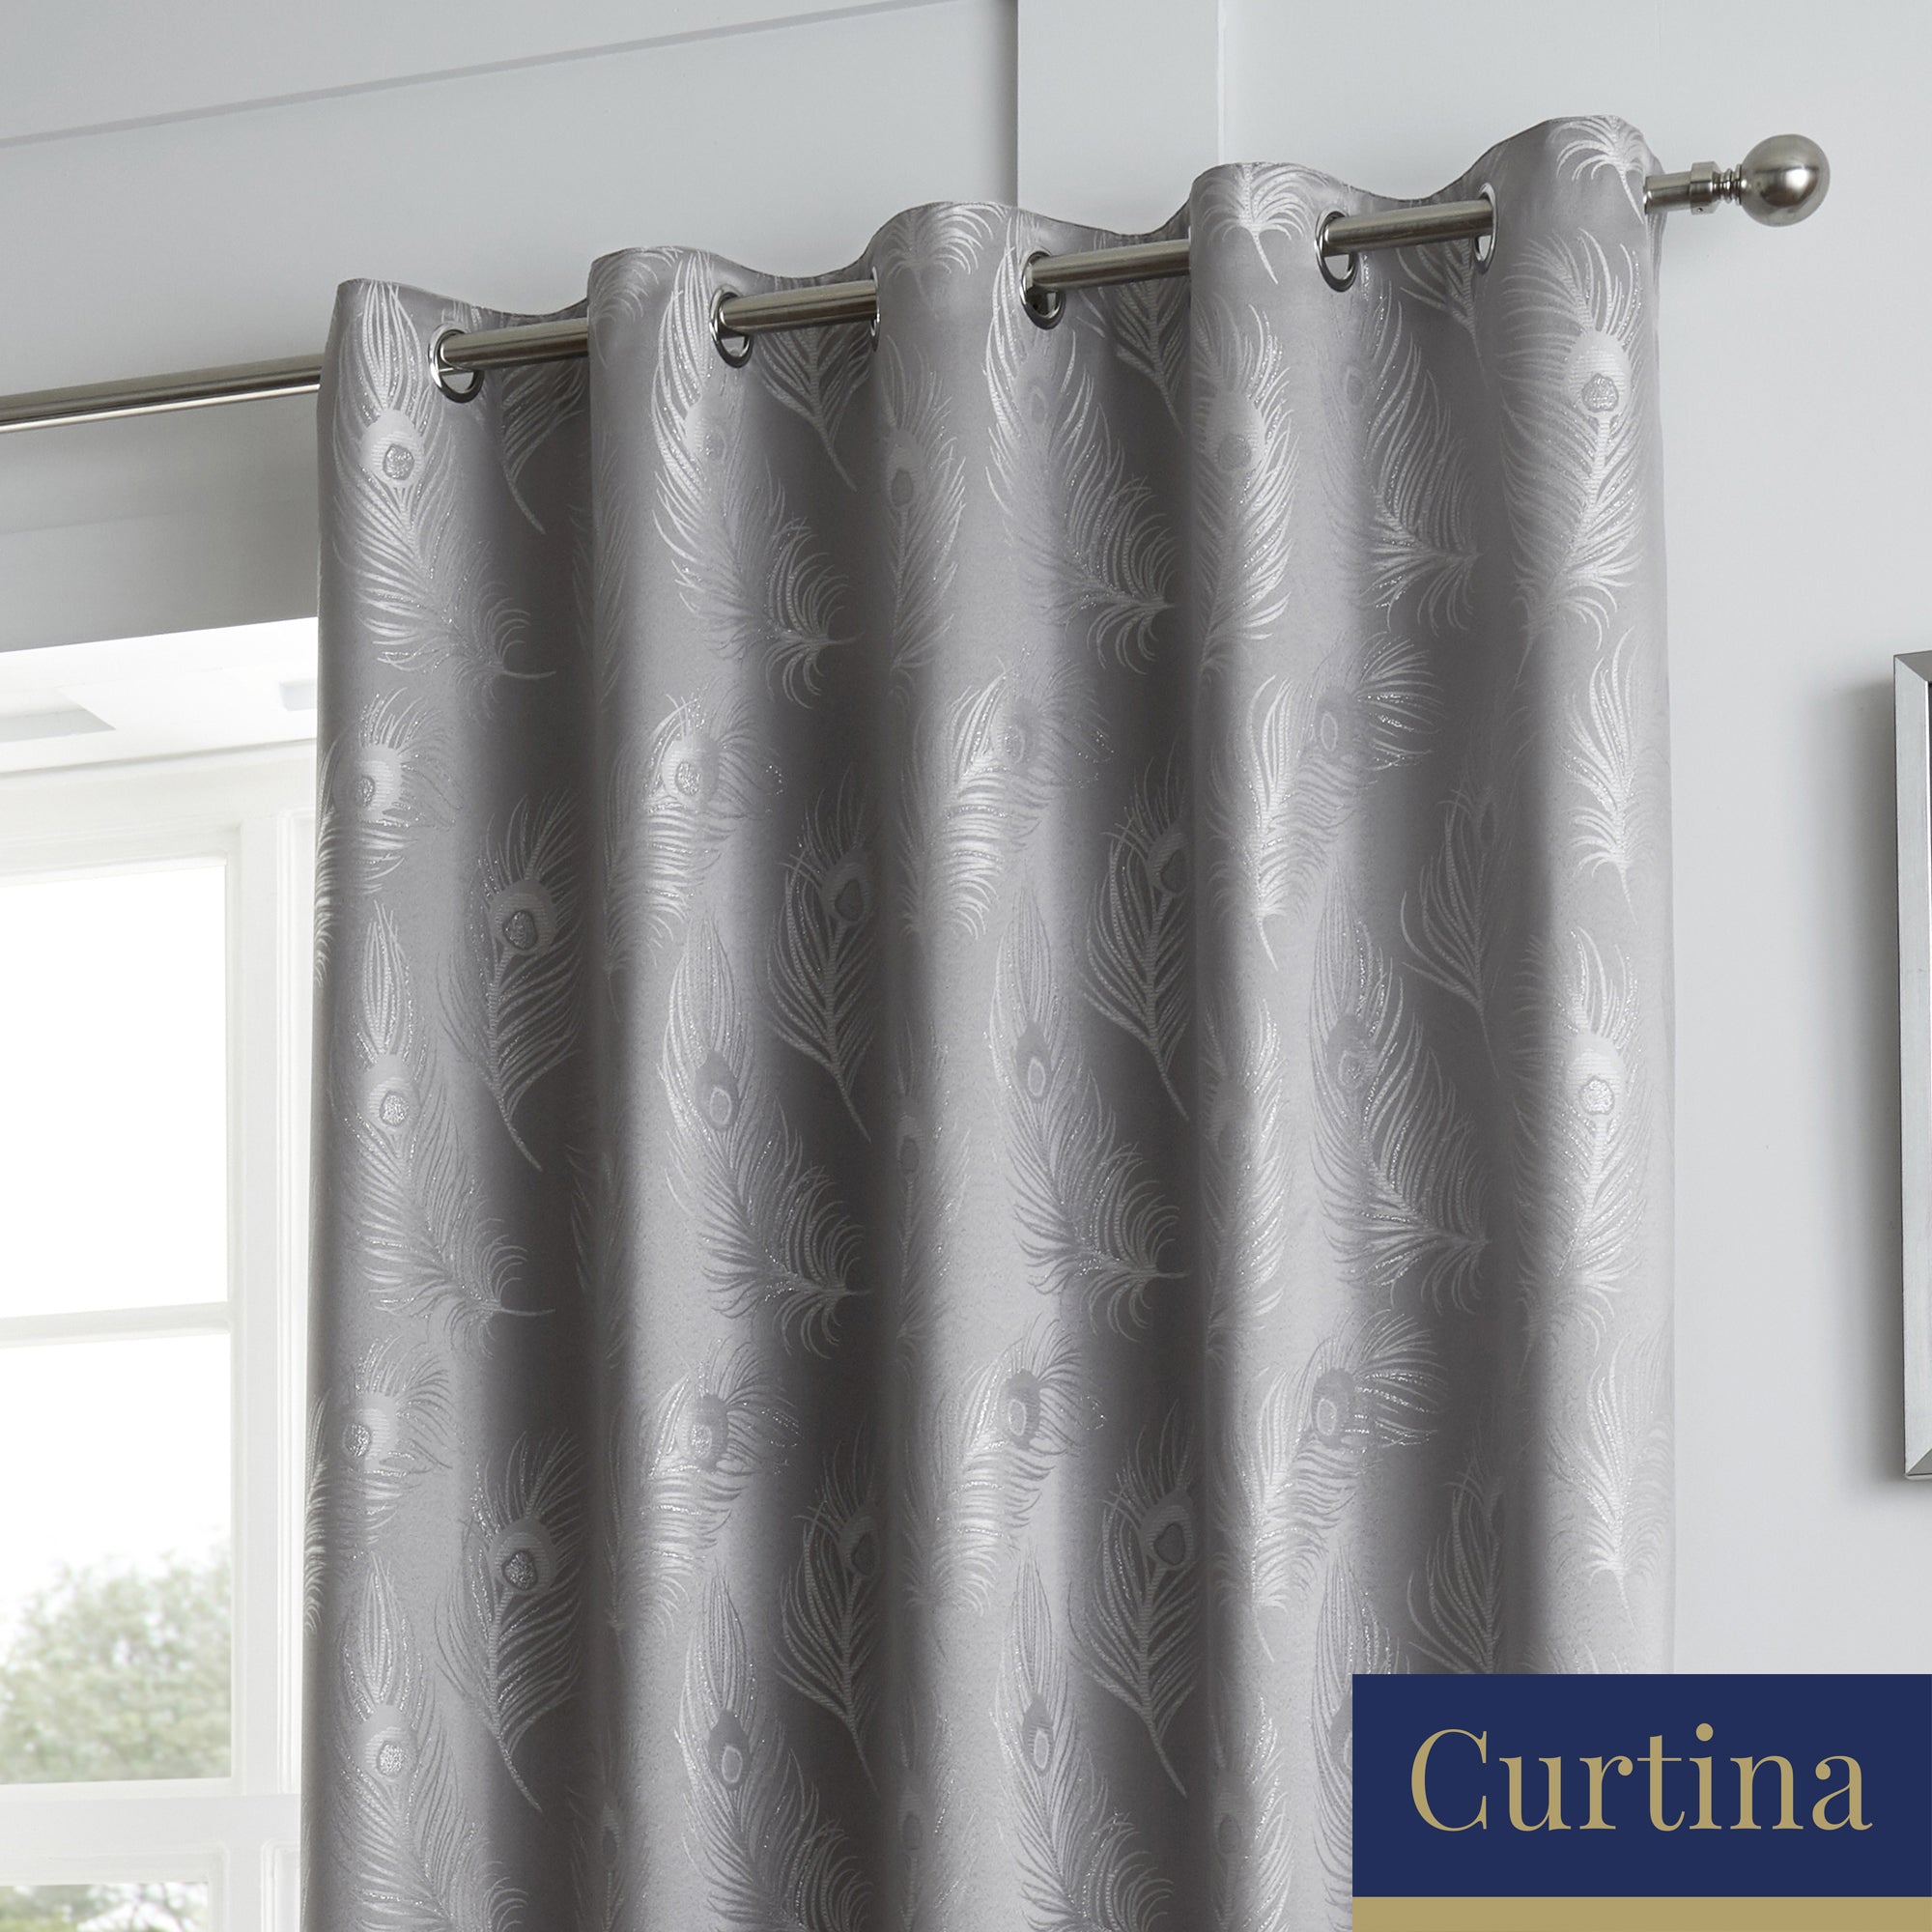 Feather - Jacquard Eyelet Curtains in Silver - By Curtina